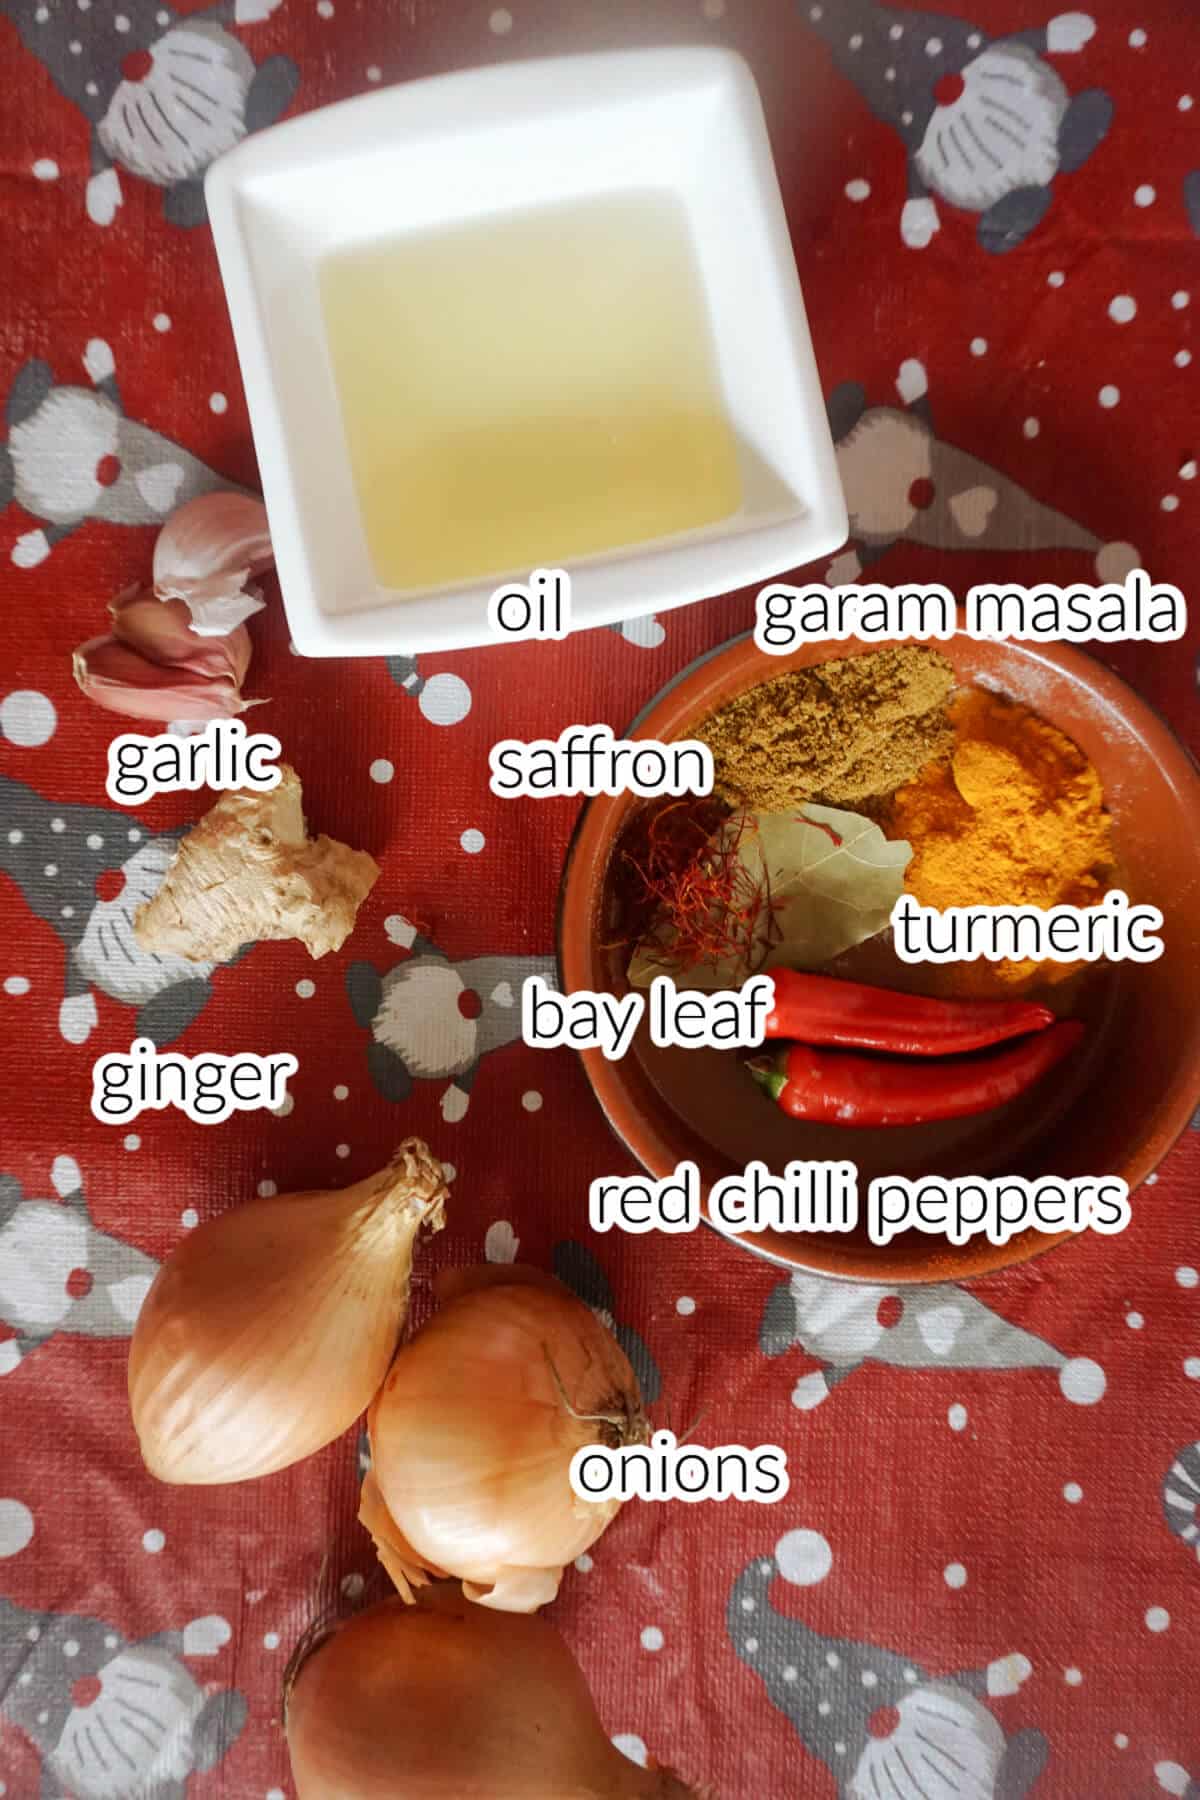 Ingredients needed to cook the chicken.